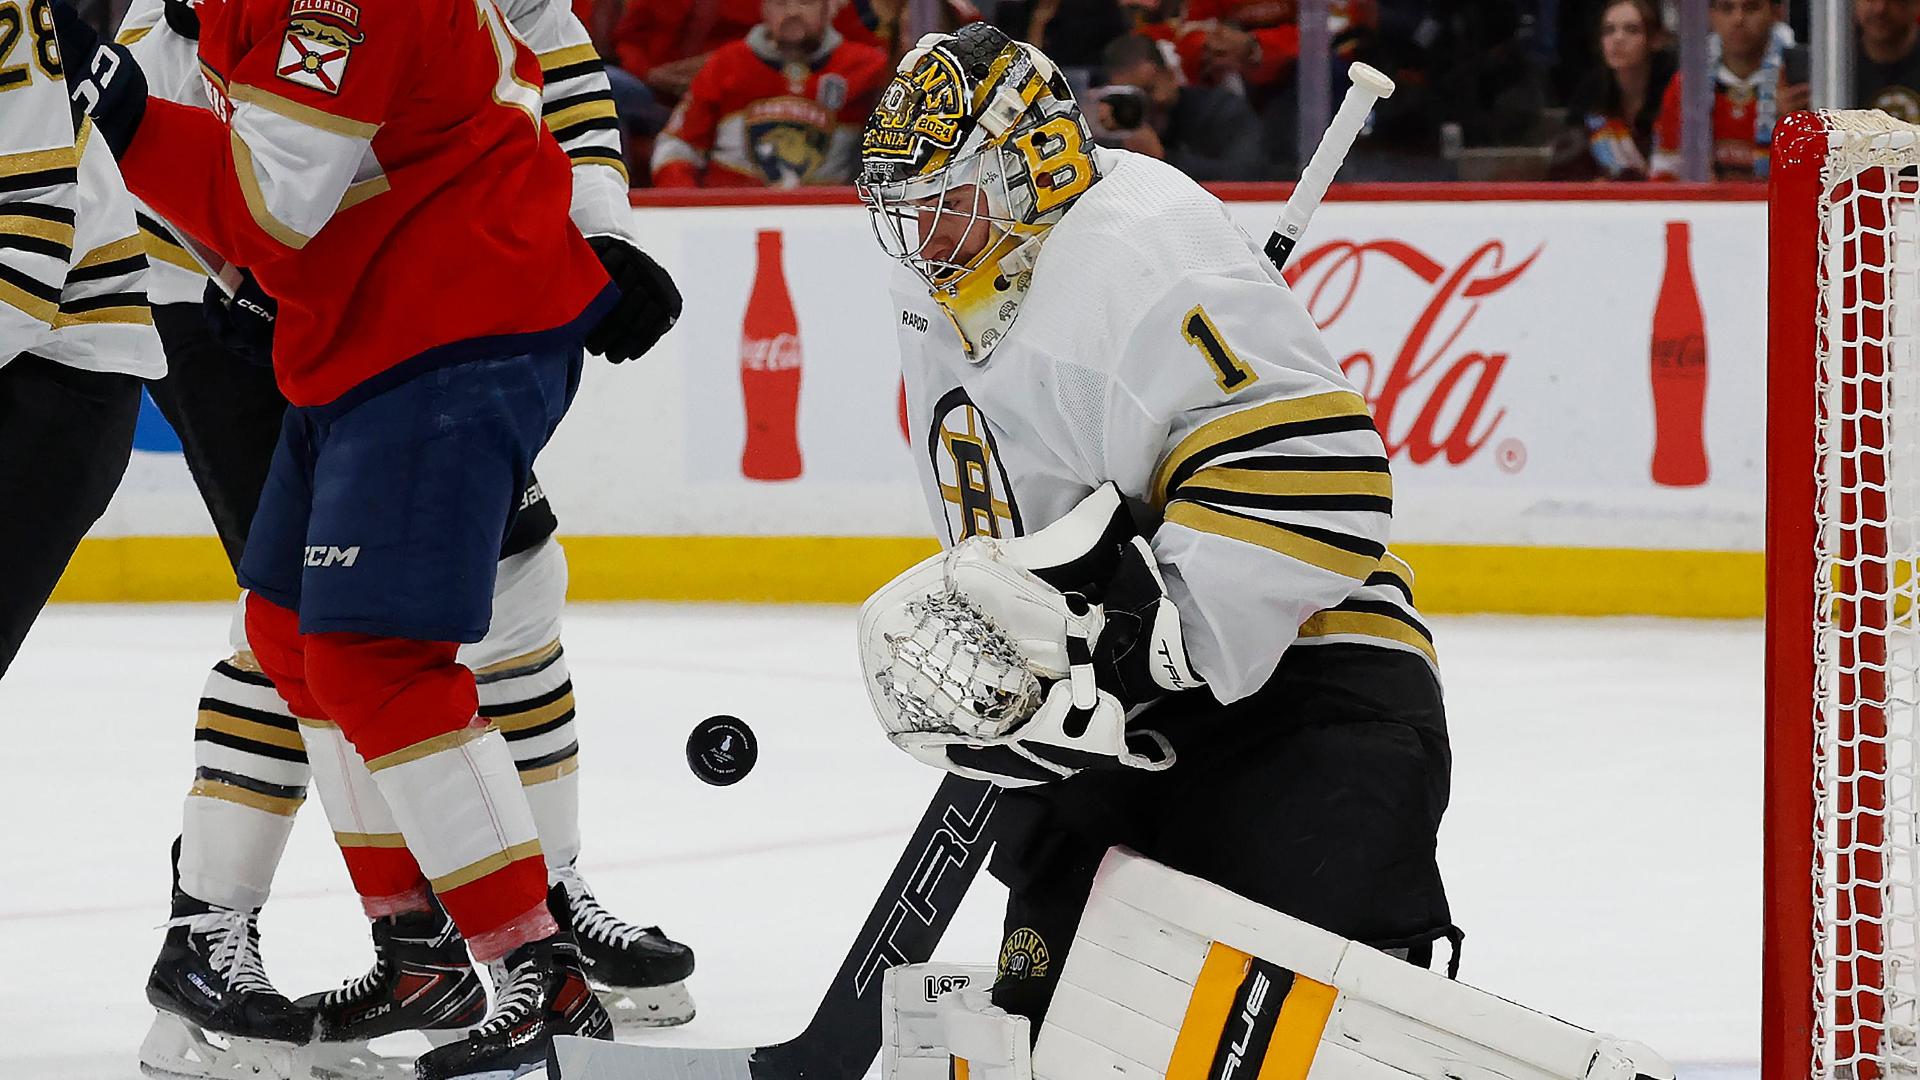 Jeremy Swayman stays locked in with impressive save for Bruins